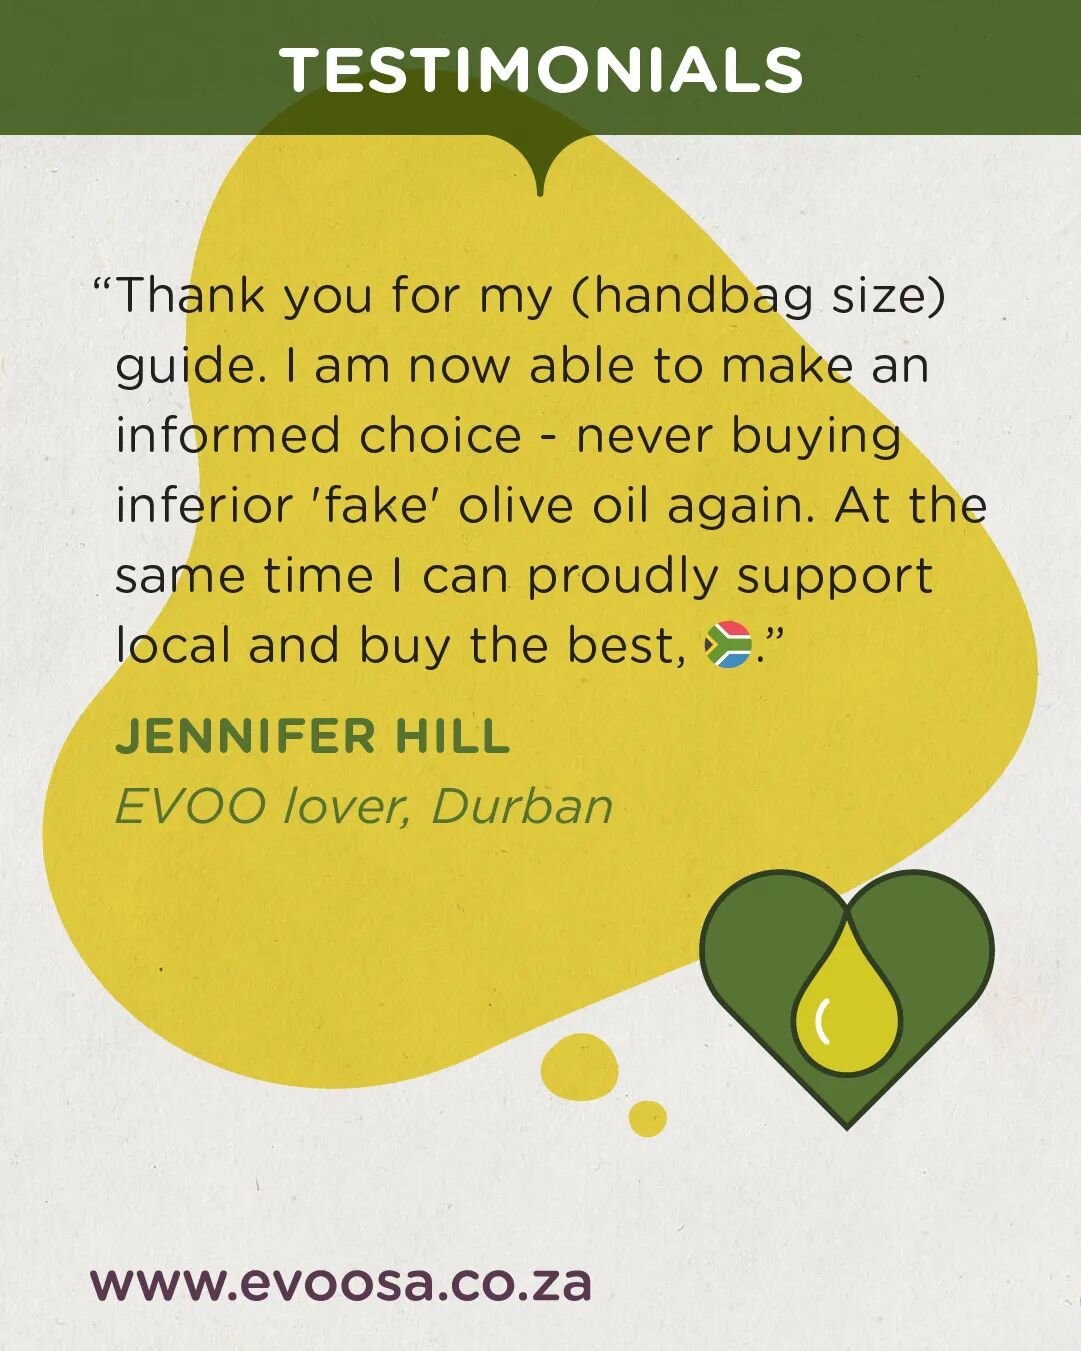 #testimonialtuesday 

South Africa produces some of the best Extra Virgin Olive Oil (EVOO) in the world and we want everyone to know about it.

Like wine, EVOO (pronounced ee-voo) is influenced by cultivar, terroir, climate and the maker. It is a gif